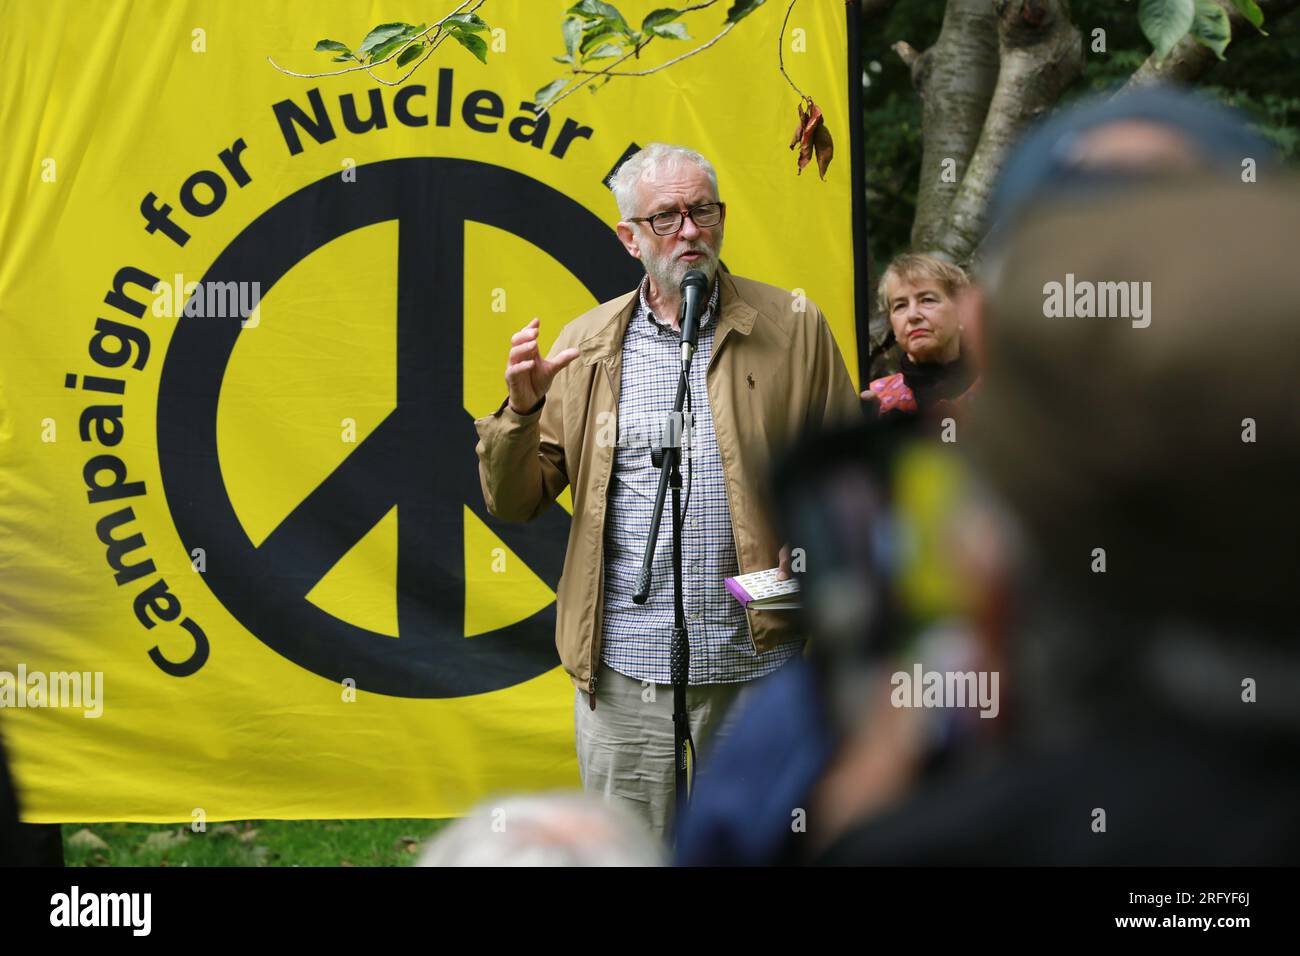 London, UK. 06 August 2023. Jeremy Corbyn MP. Hiroshima Day commemorates the victims of the US atomic bombs dropped on Japan during World War II. The Hiroshima Remembered event in Tavistock Square was organized by the London Campaign for Nuclear Disarmament (CND). Gathered at the annual event, they call for a complete ban on nuclear weapons. Credit: Waldemar Sikora/Alamy Live News Stock Photo